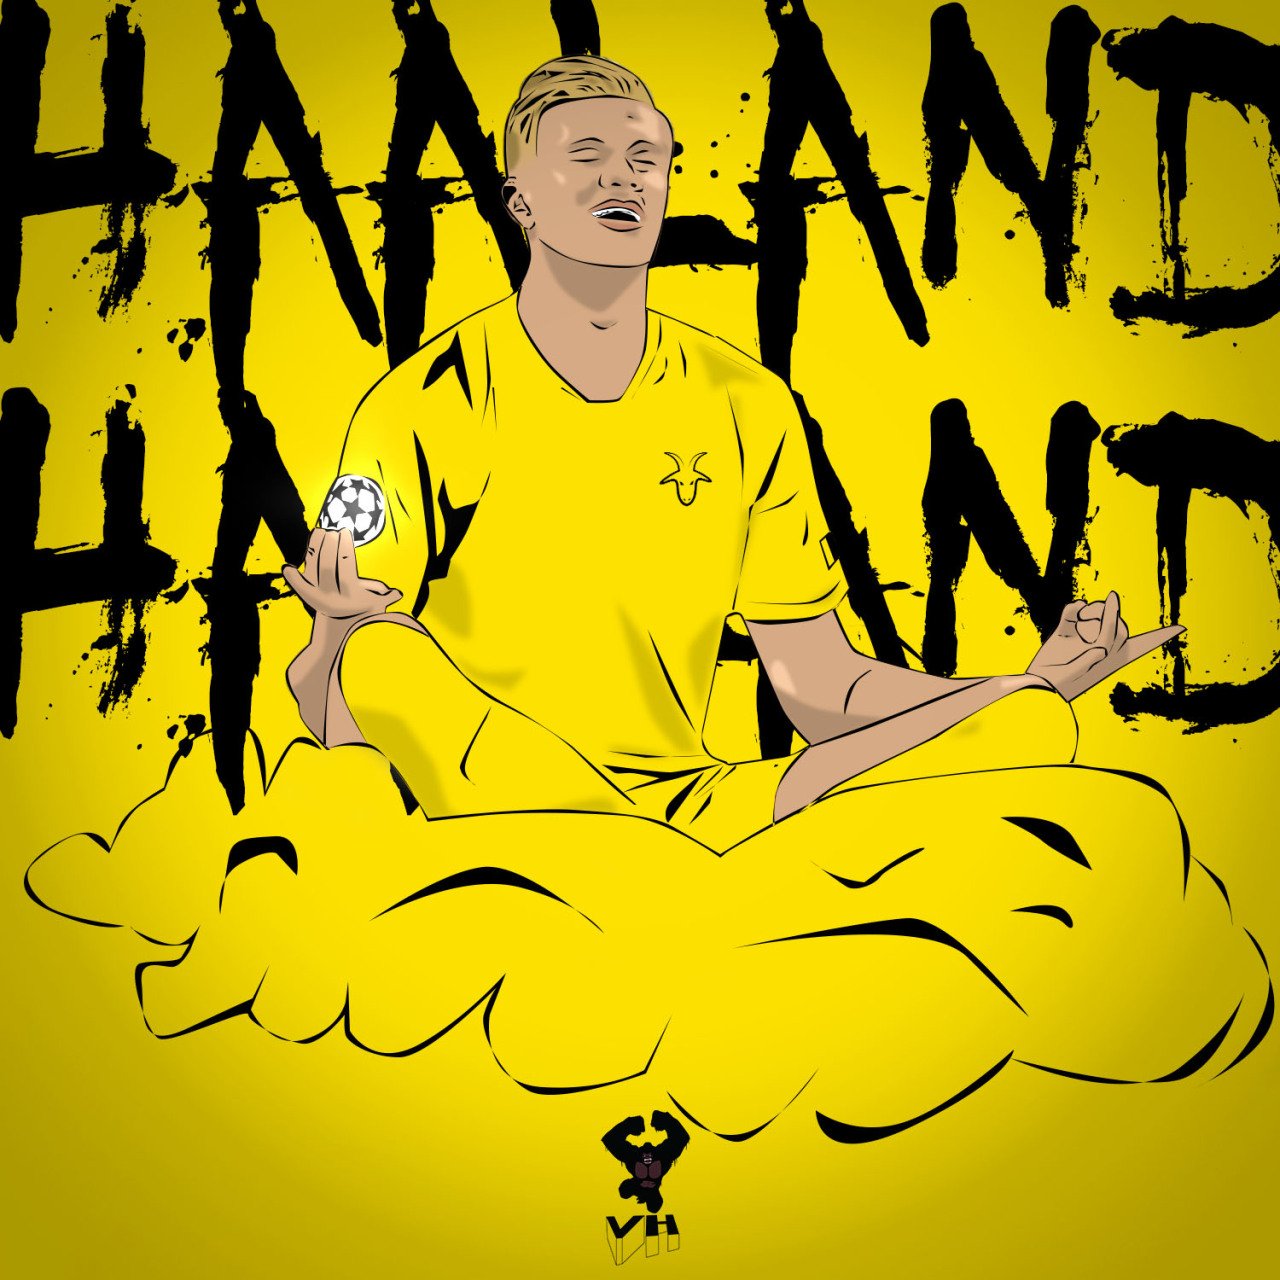 City closer than ever to sign Haaland